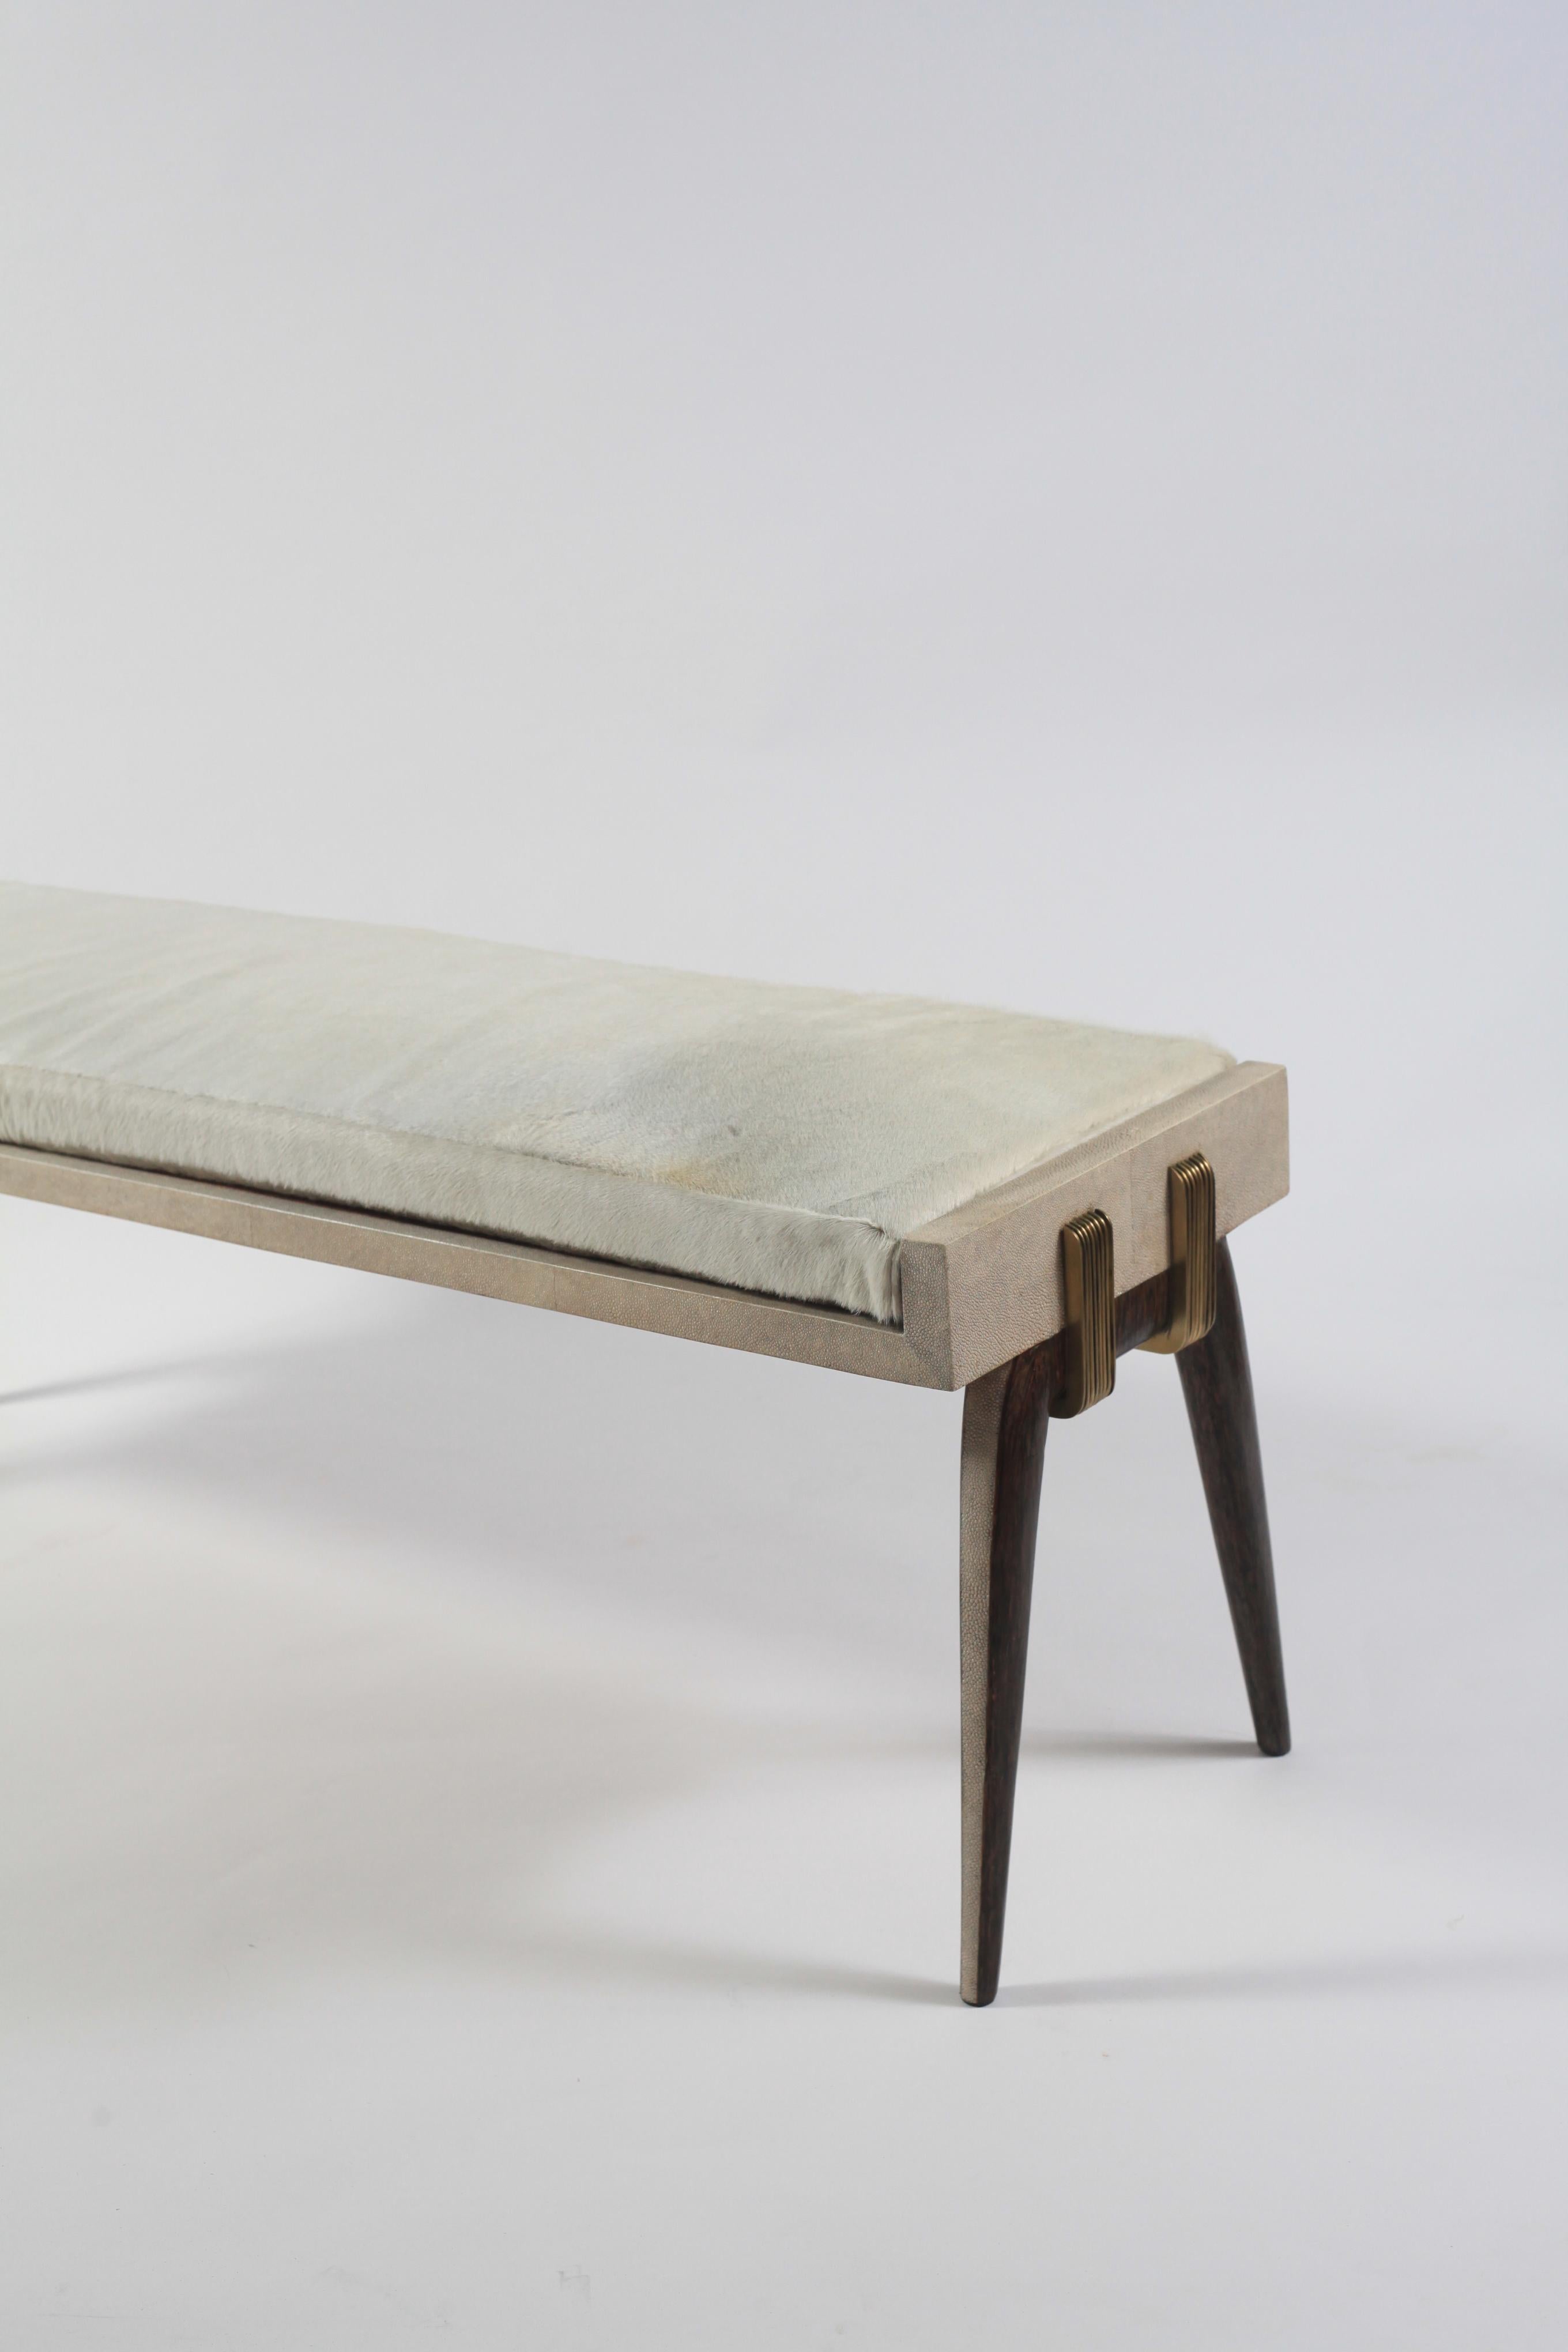 Art Deco Pianist Bench in Cream Shagreen and Bronze-Patina Brass by R&Y Augousti For Sale